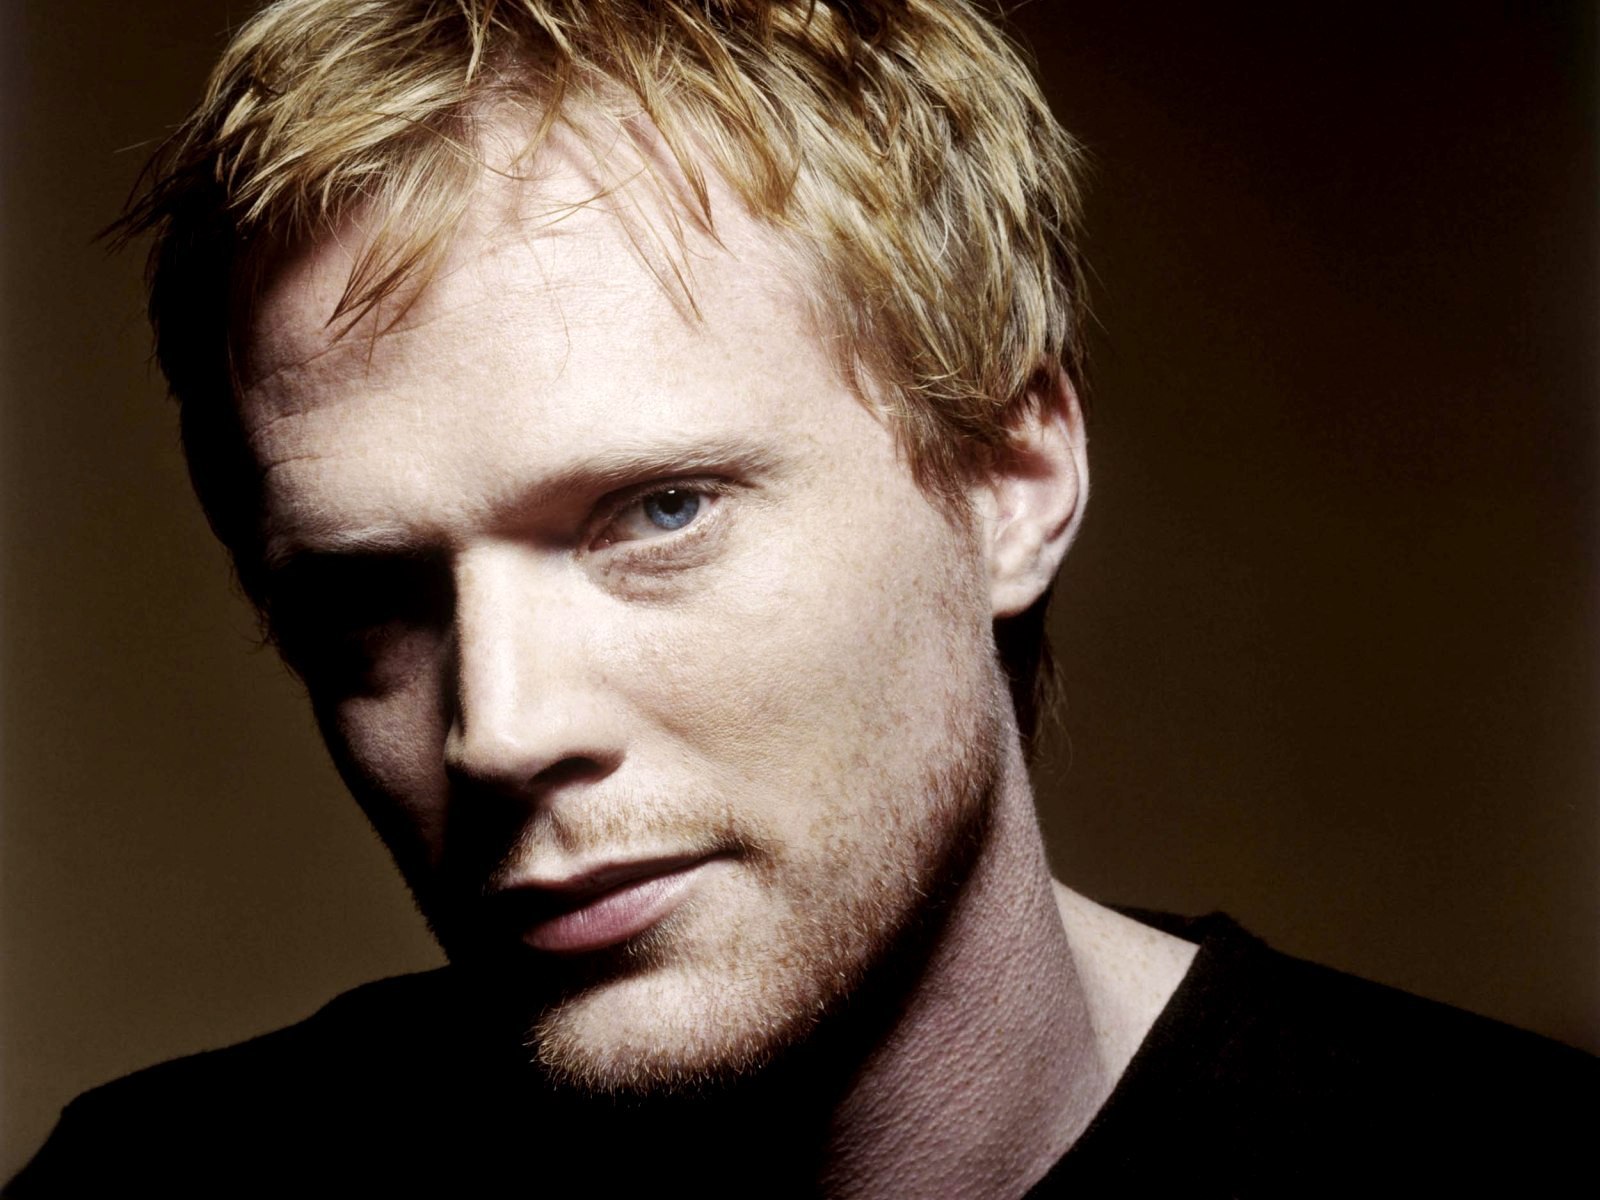 Paul Bettany HD Wallpaper Image Background